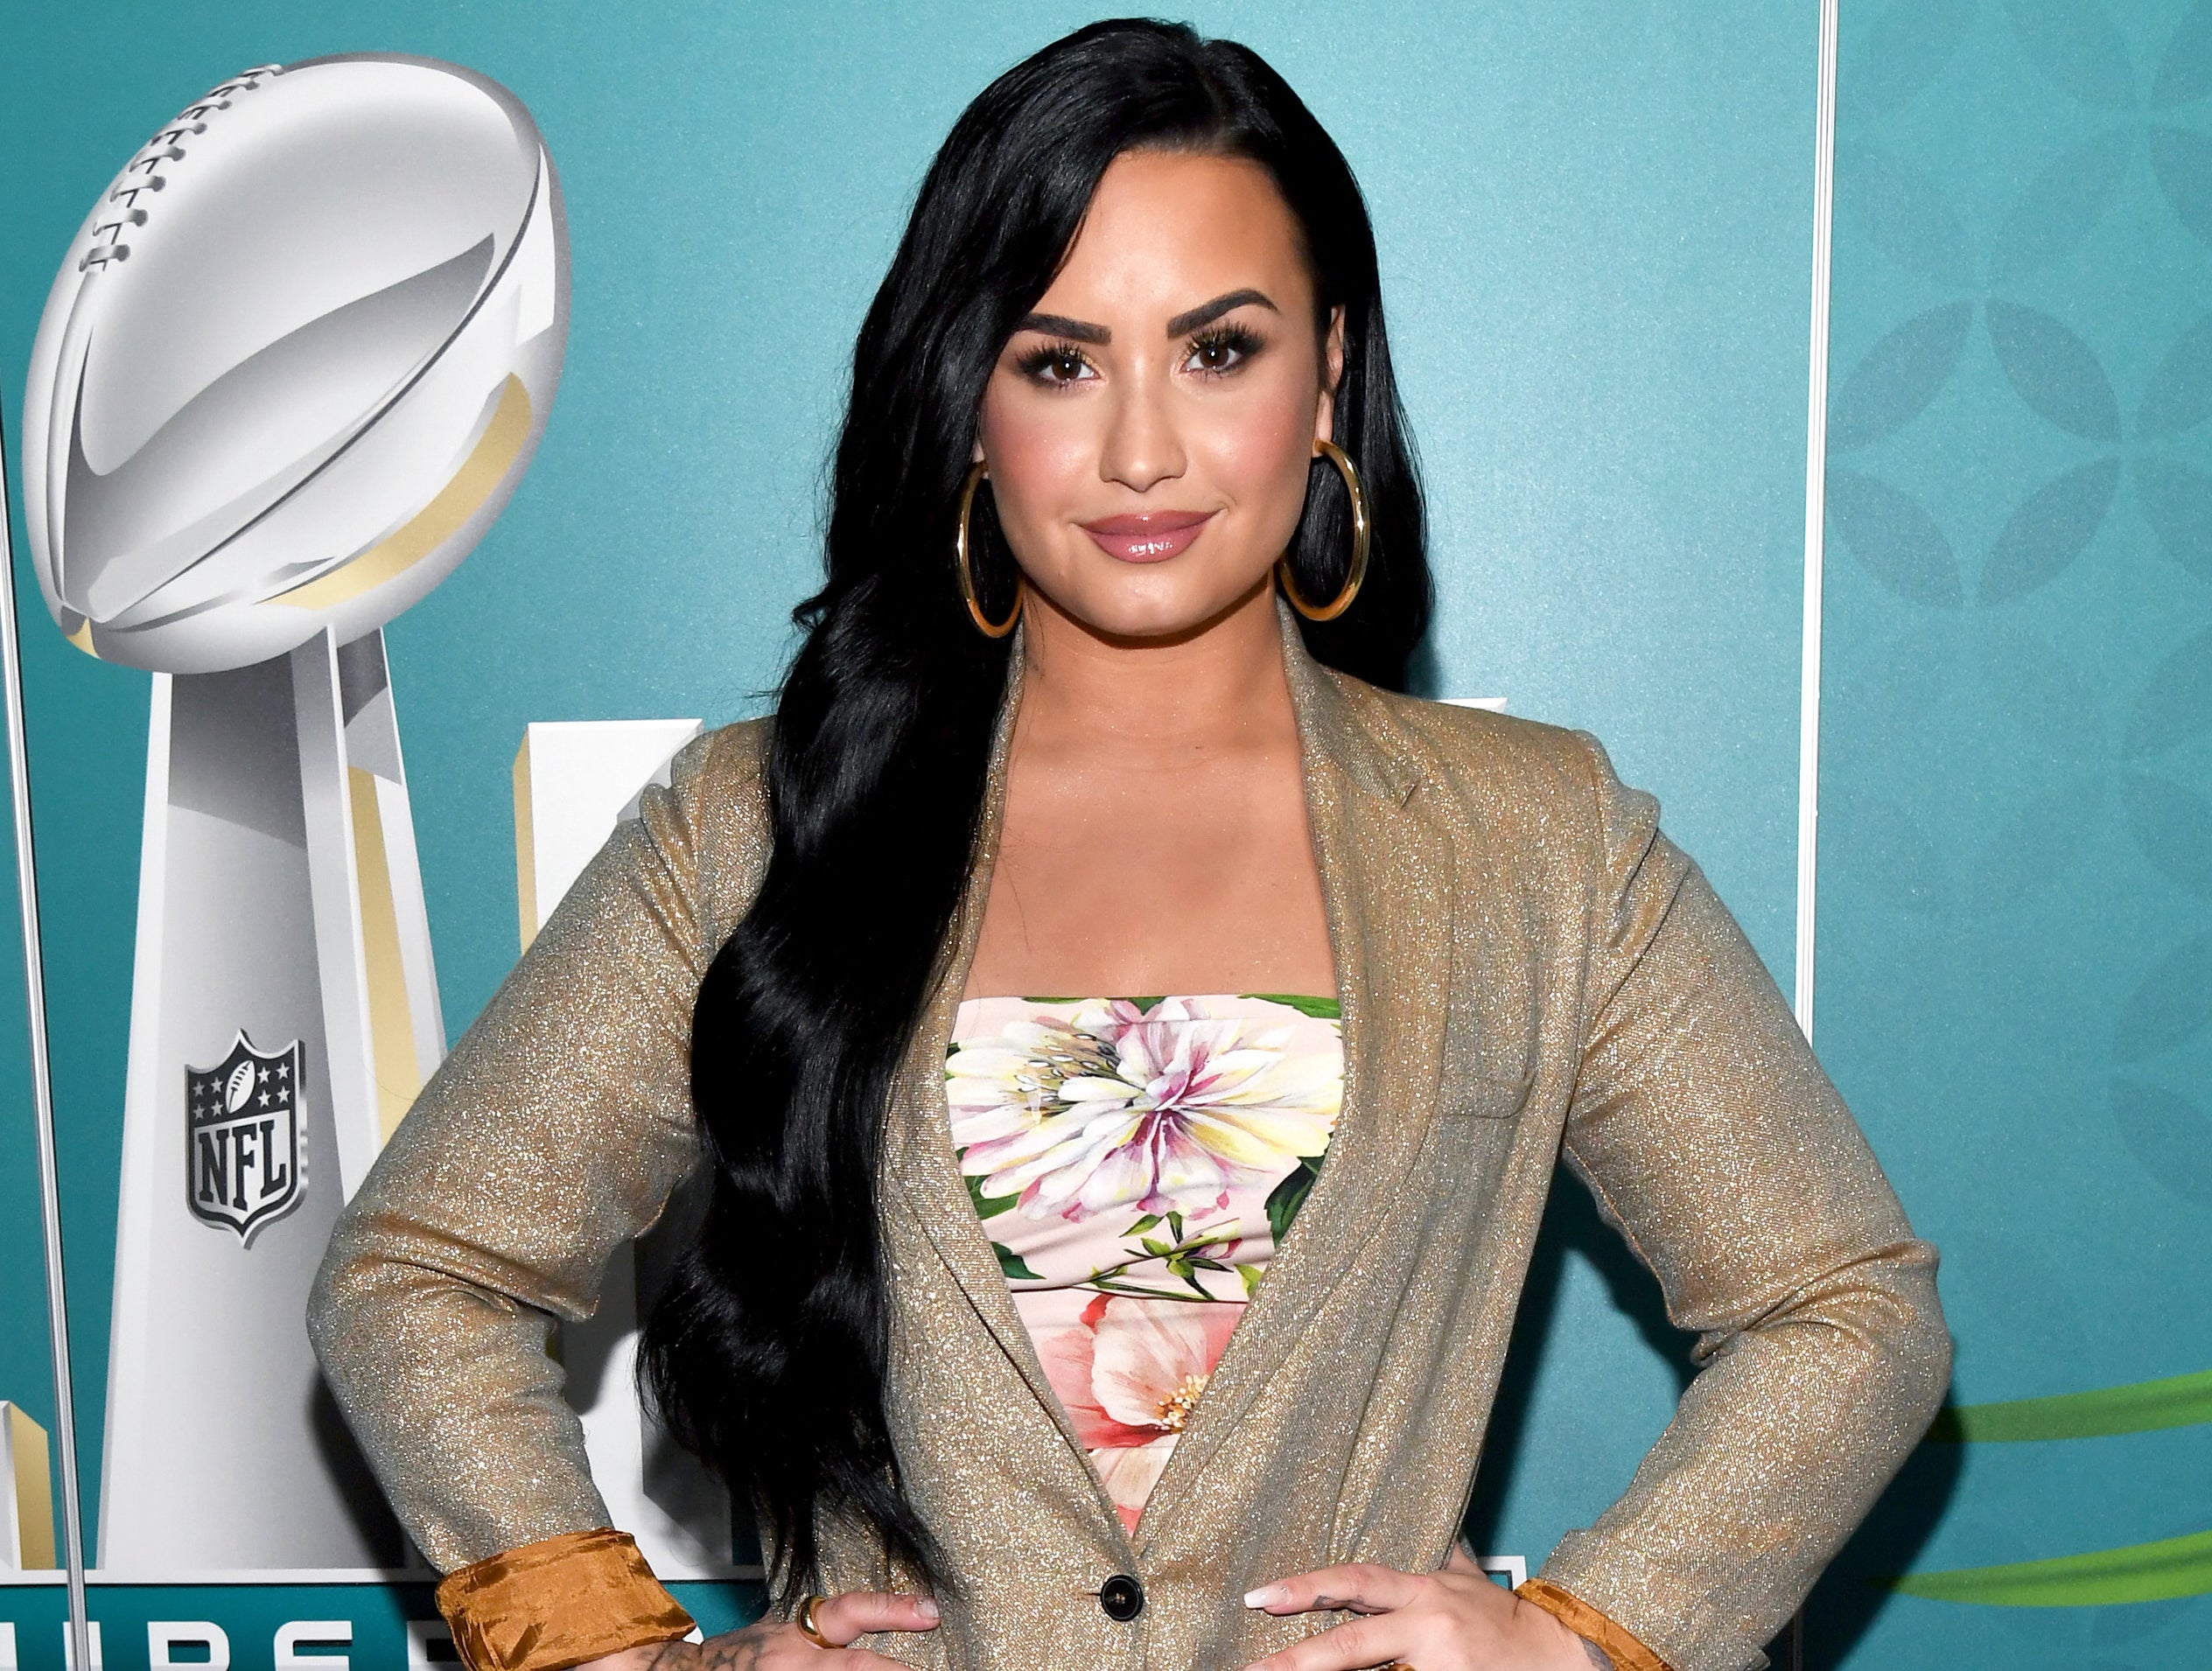 Demi stands with her hands on her hips while wearing a gold blazer